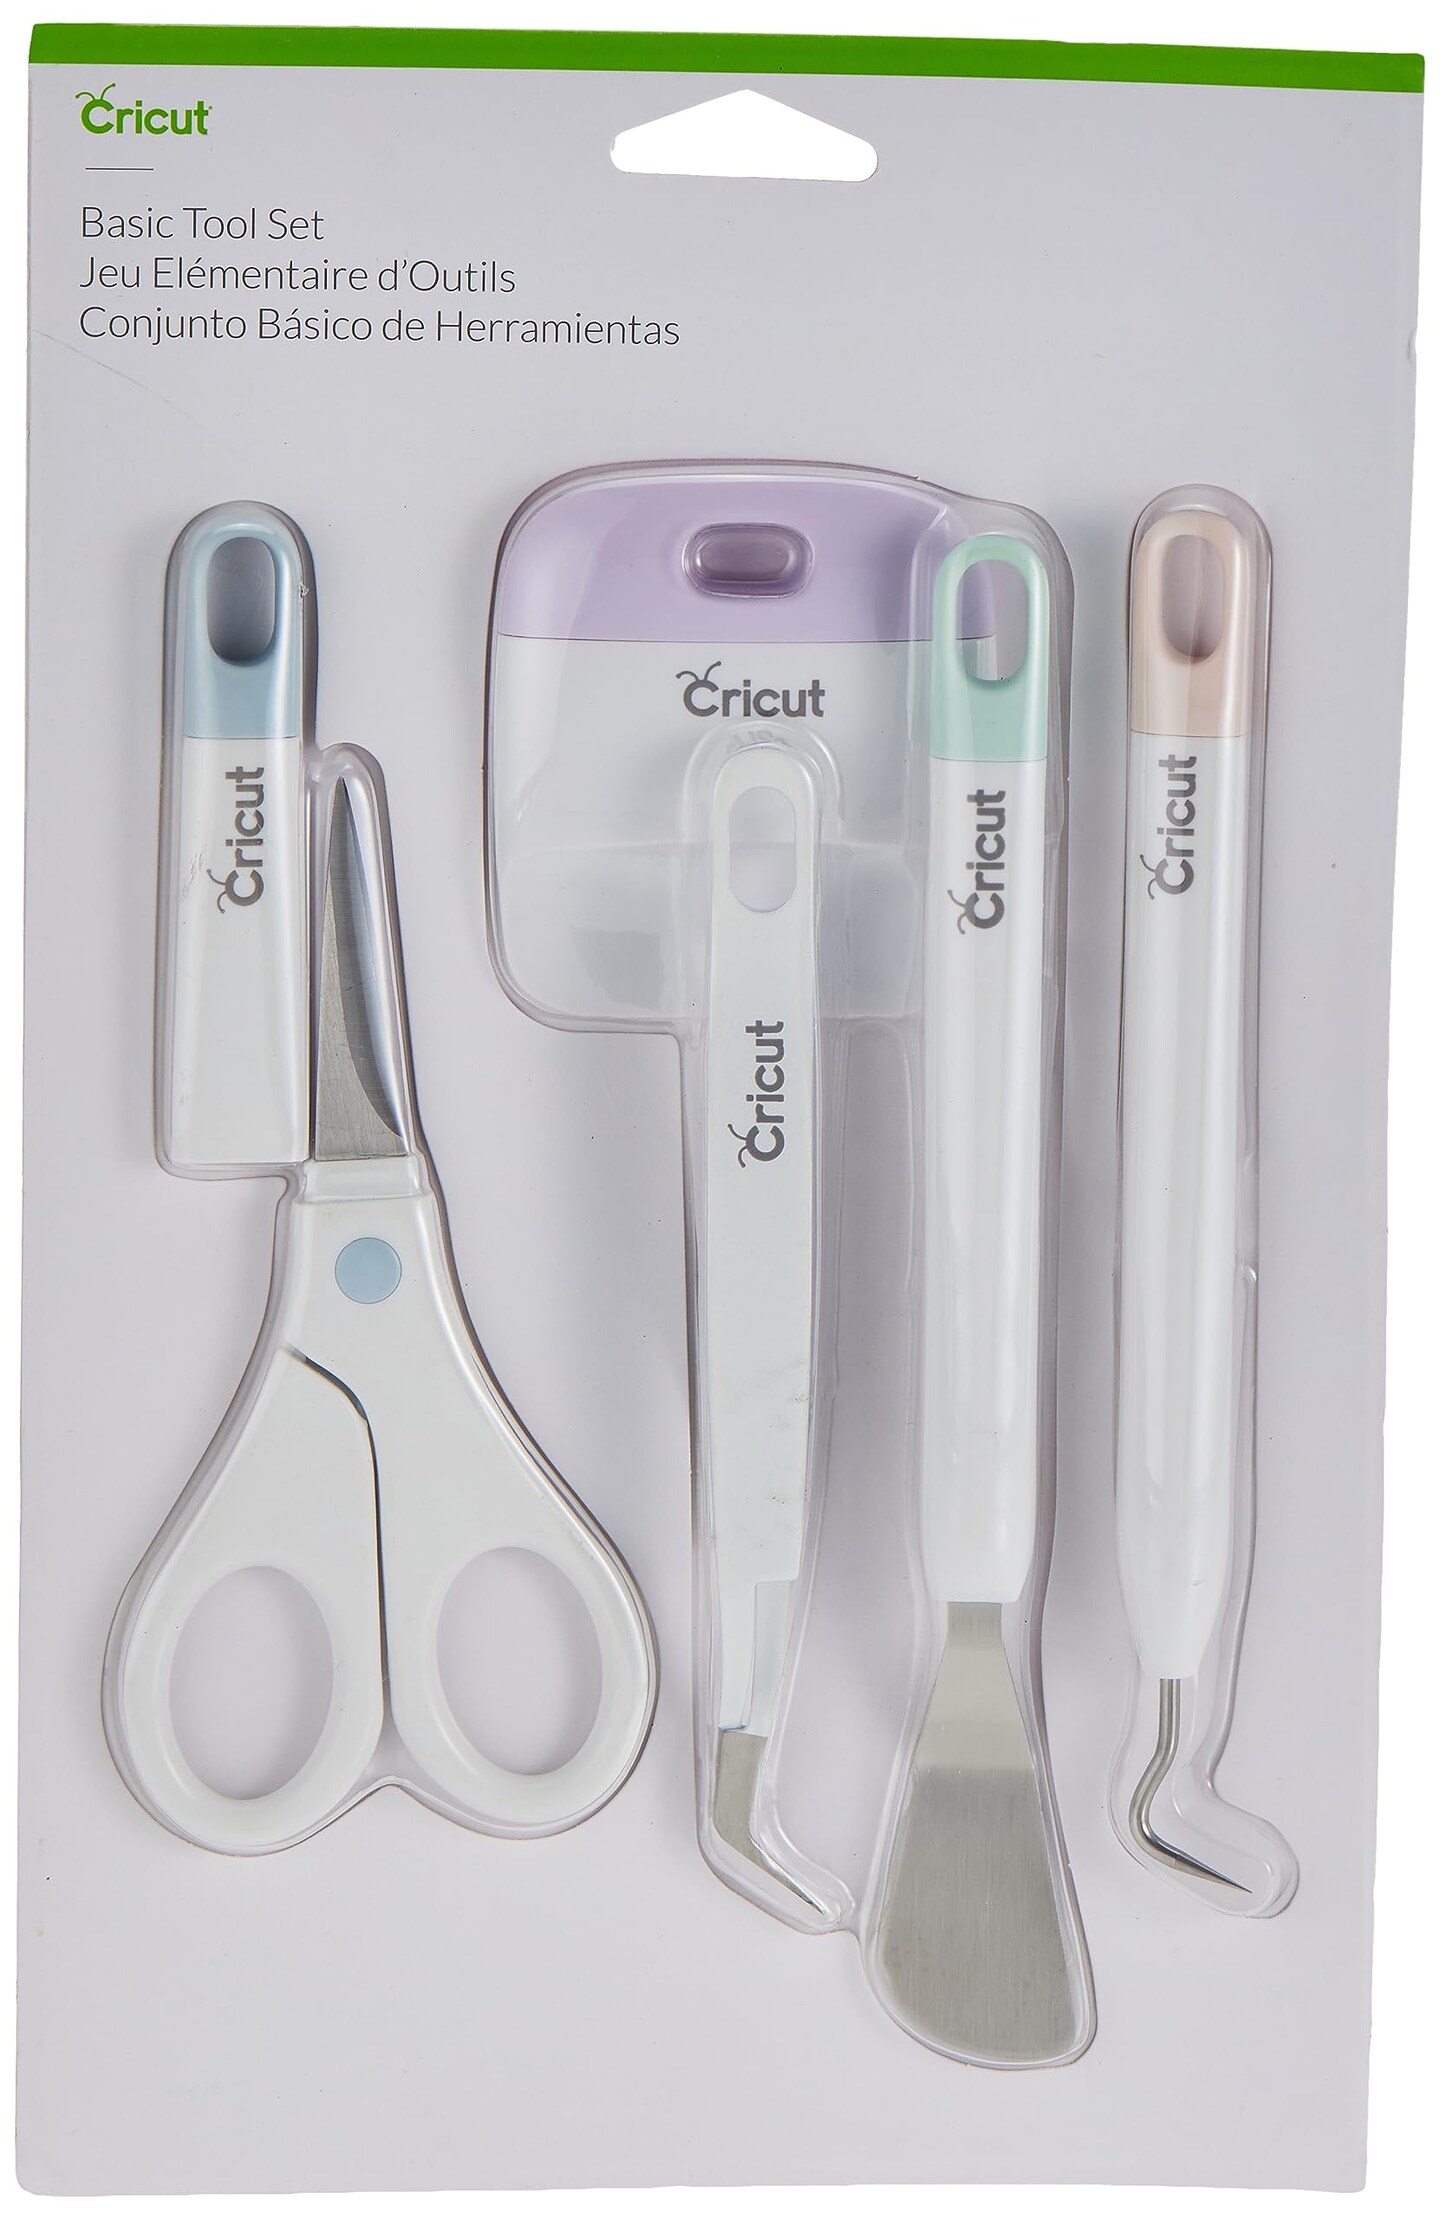 Cricut Basic Tool Set - Precision Tool Kit for Crafting and DIYs, Perfect for Vinyl, Paper &#x26; Iron-on Projects, Great Companion for Cricut Cutting Machines, Core Colors, 10.25 x 6.5 x 0.75, 5-Piece